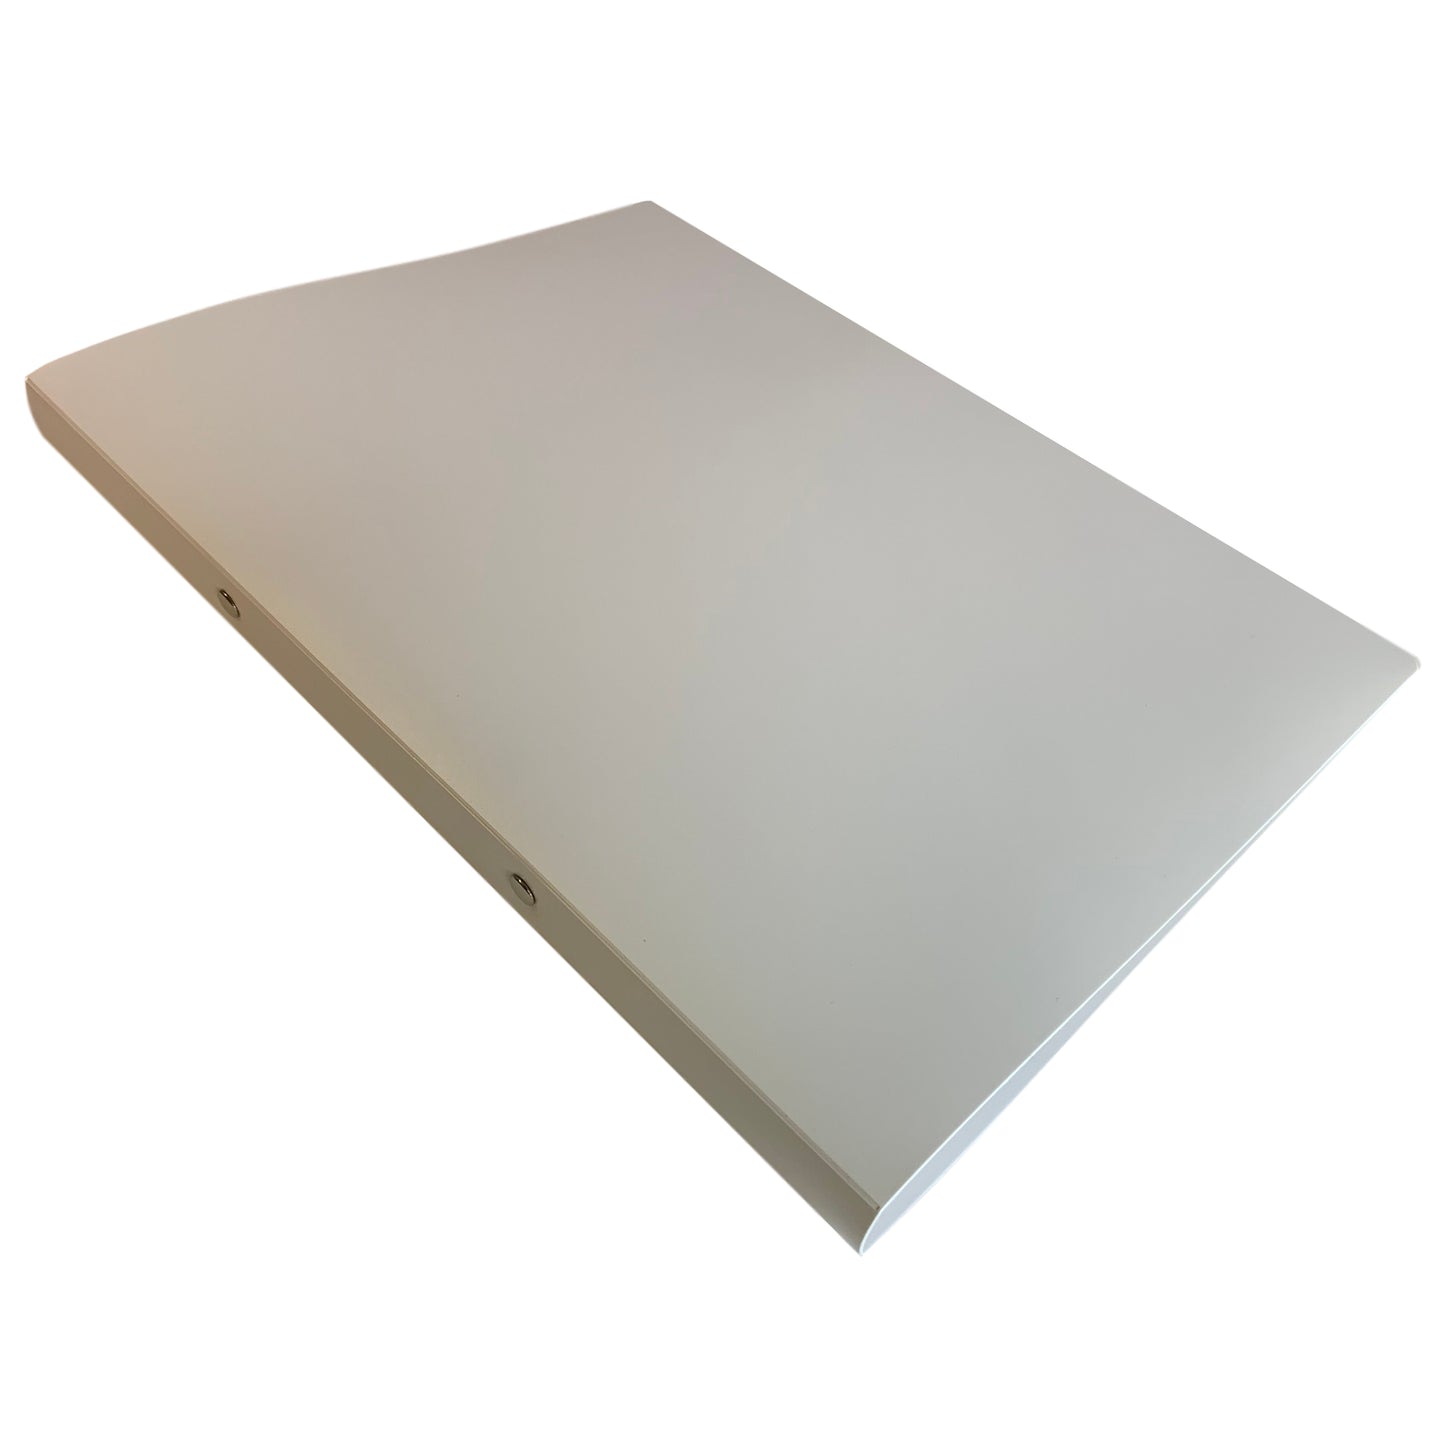 A4 White Ring Binder by Janrax